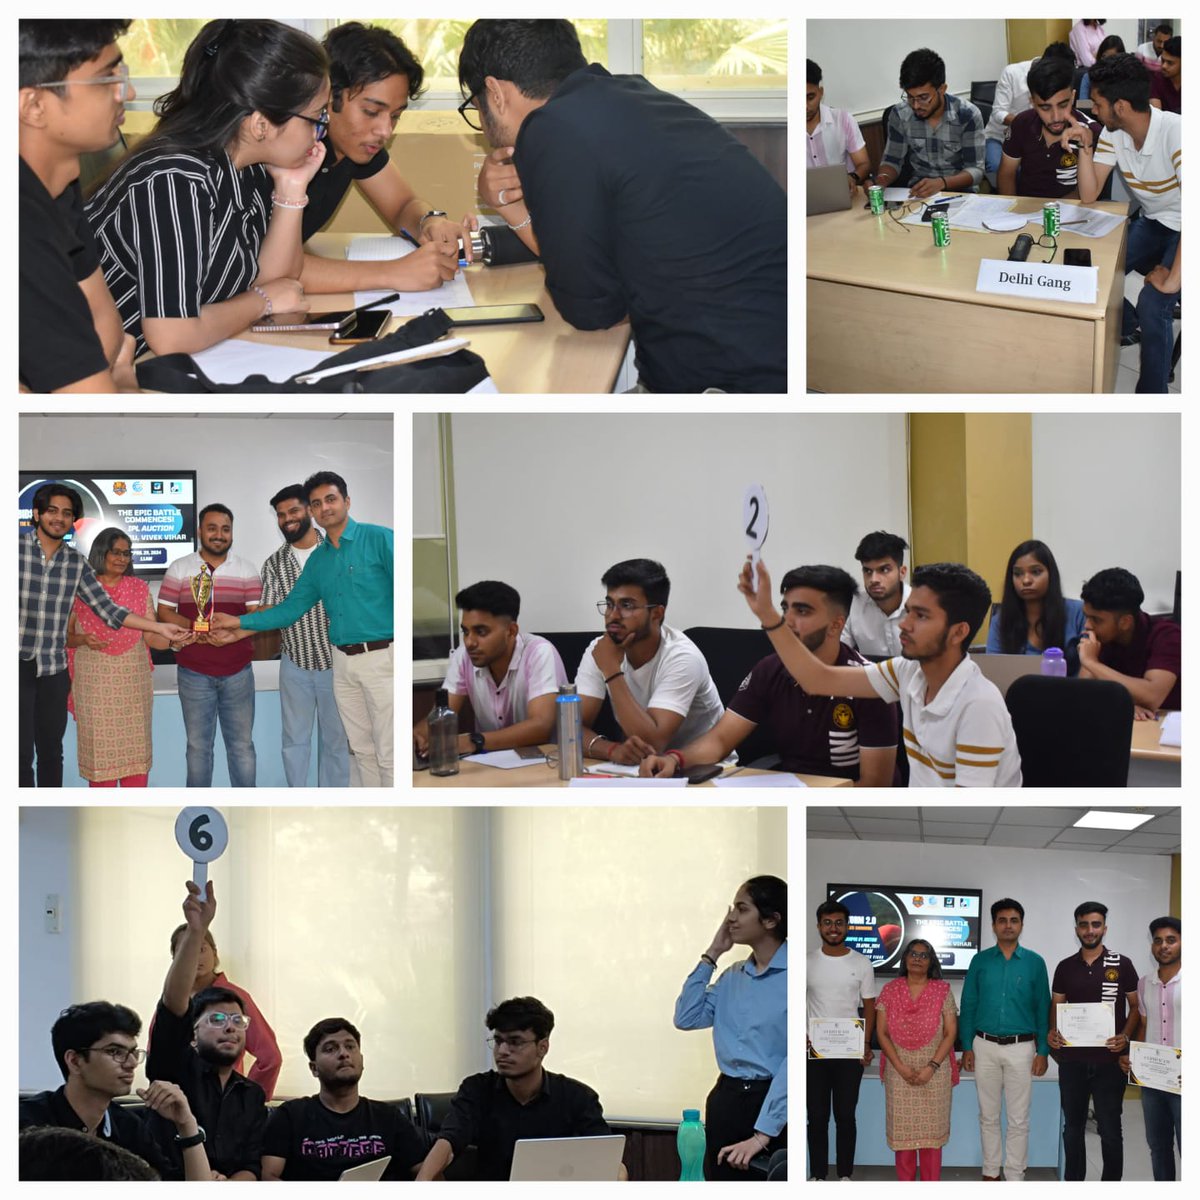 BIDSTORM 2.0 IPL AUCTION organized by #DSEU Vivek Vihar campus on 29 April 2024. The event aimed to enhance #students' #resourceutilization skills using Microsoft Excel, including #budgetallocation, #MoneyManagement, & #DecisionMaking, fostering  #negotiation & #competency skills